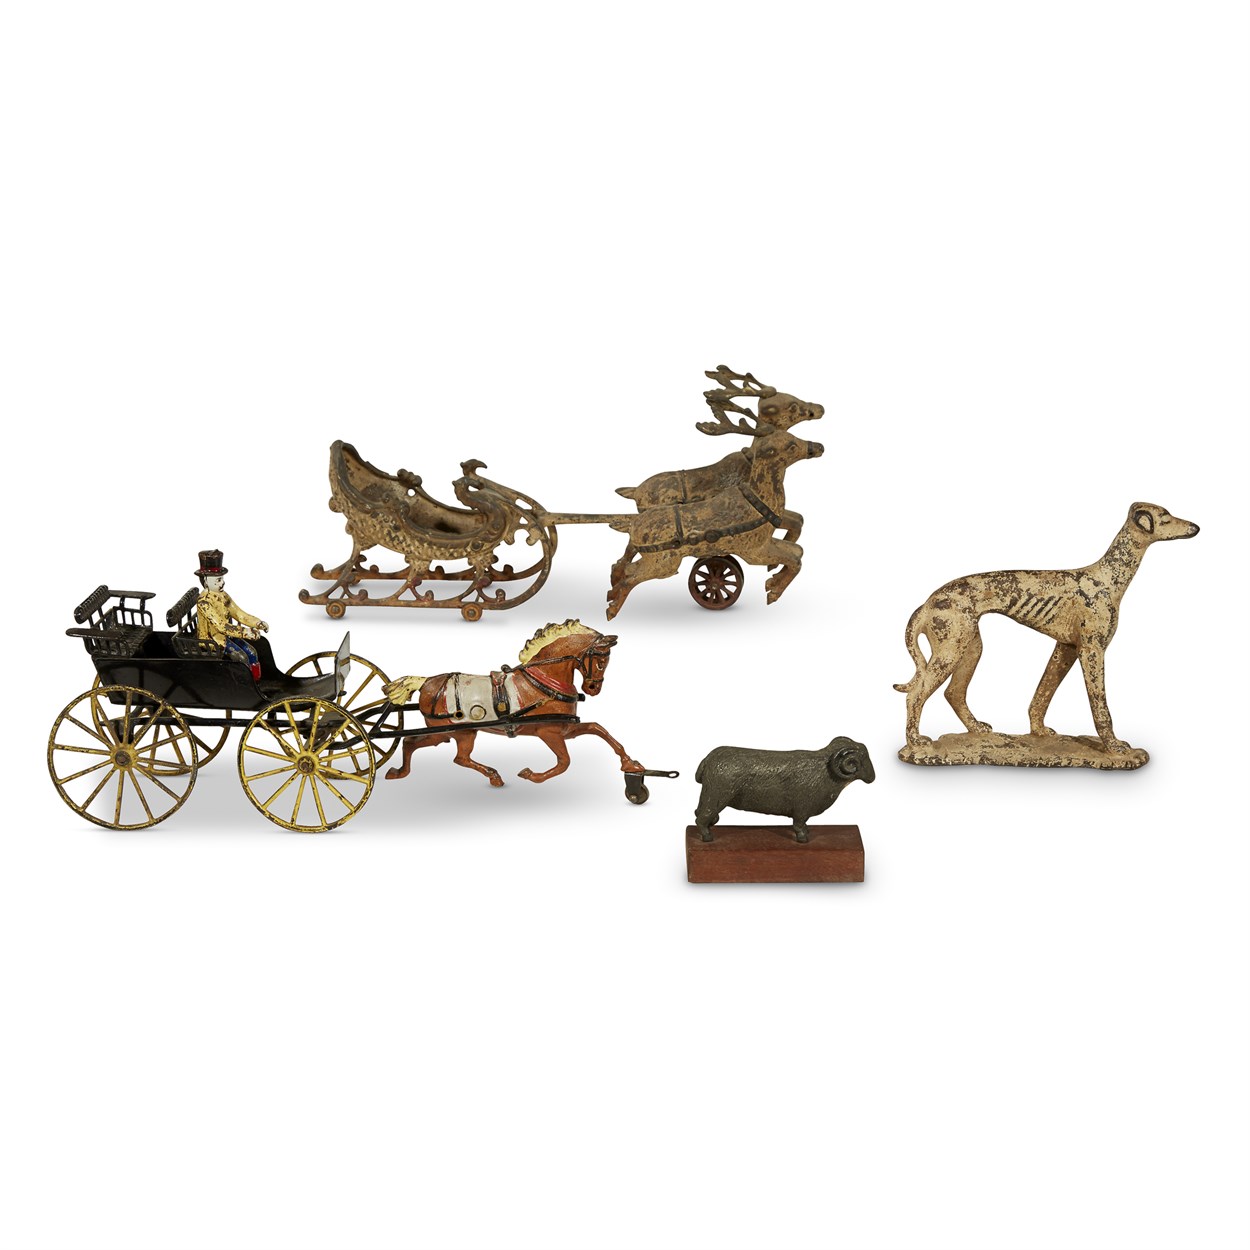 Lot 77 - Antique cast iron horse-drawn carriage with driver